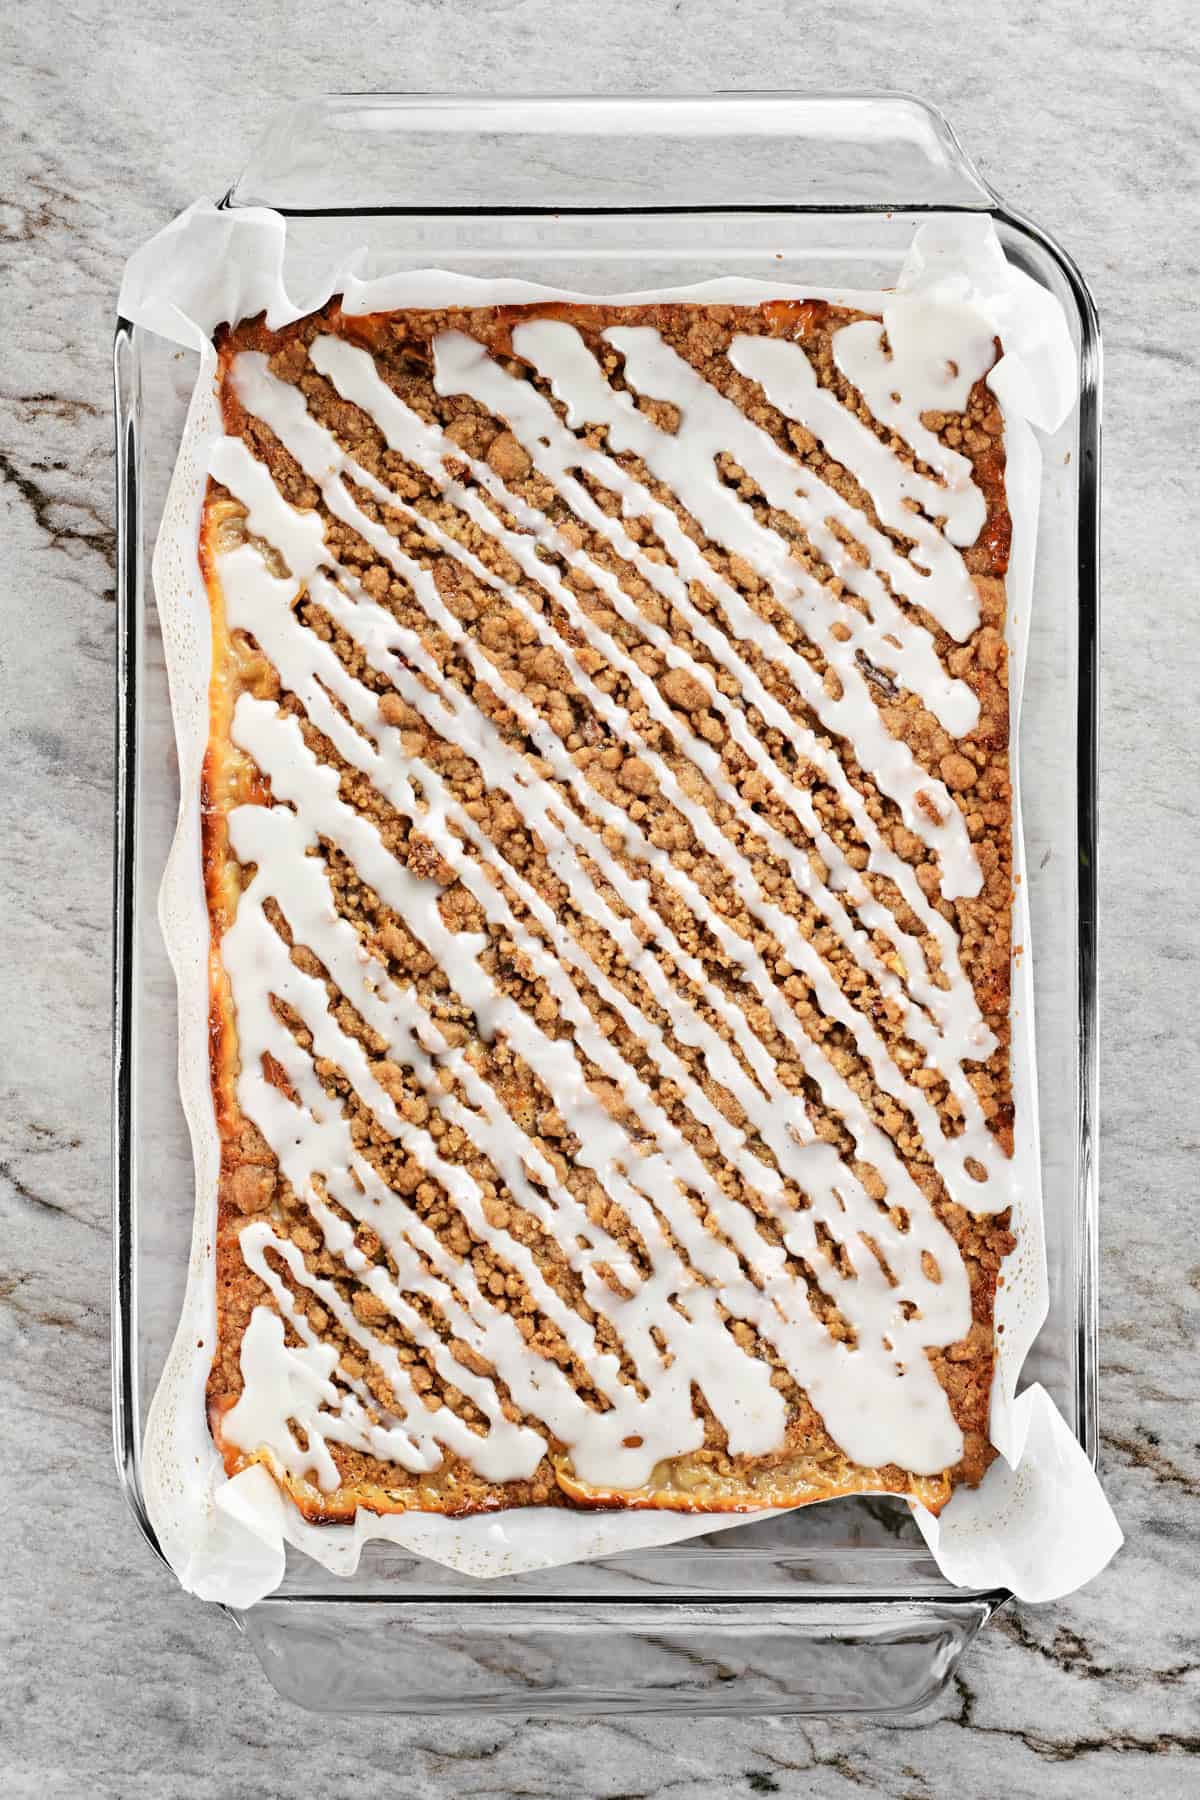 Apple bars in a pan with icing.